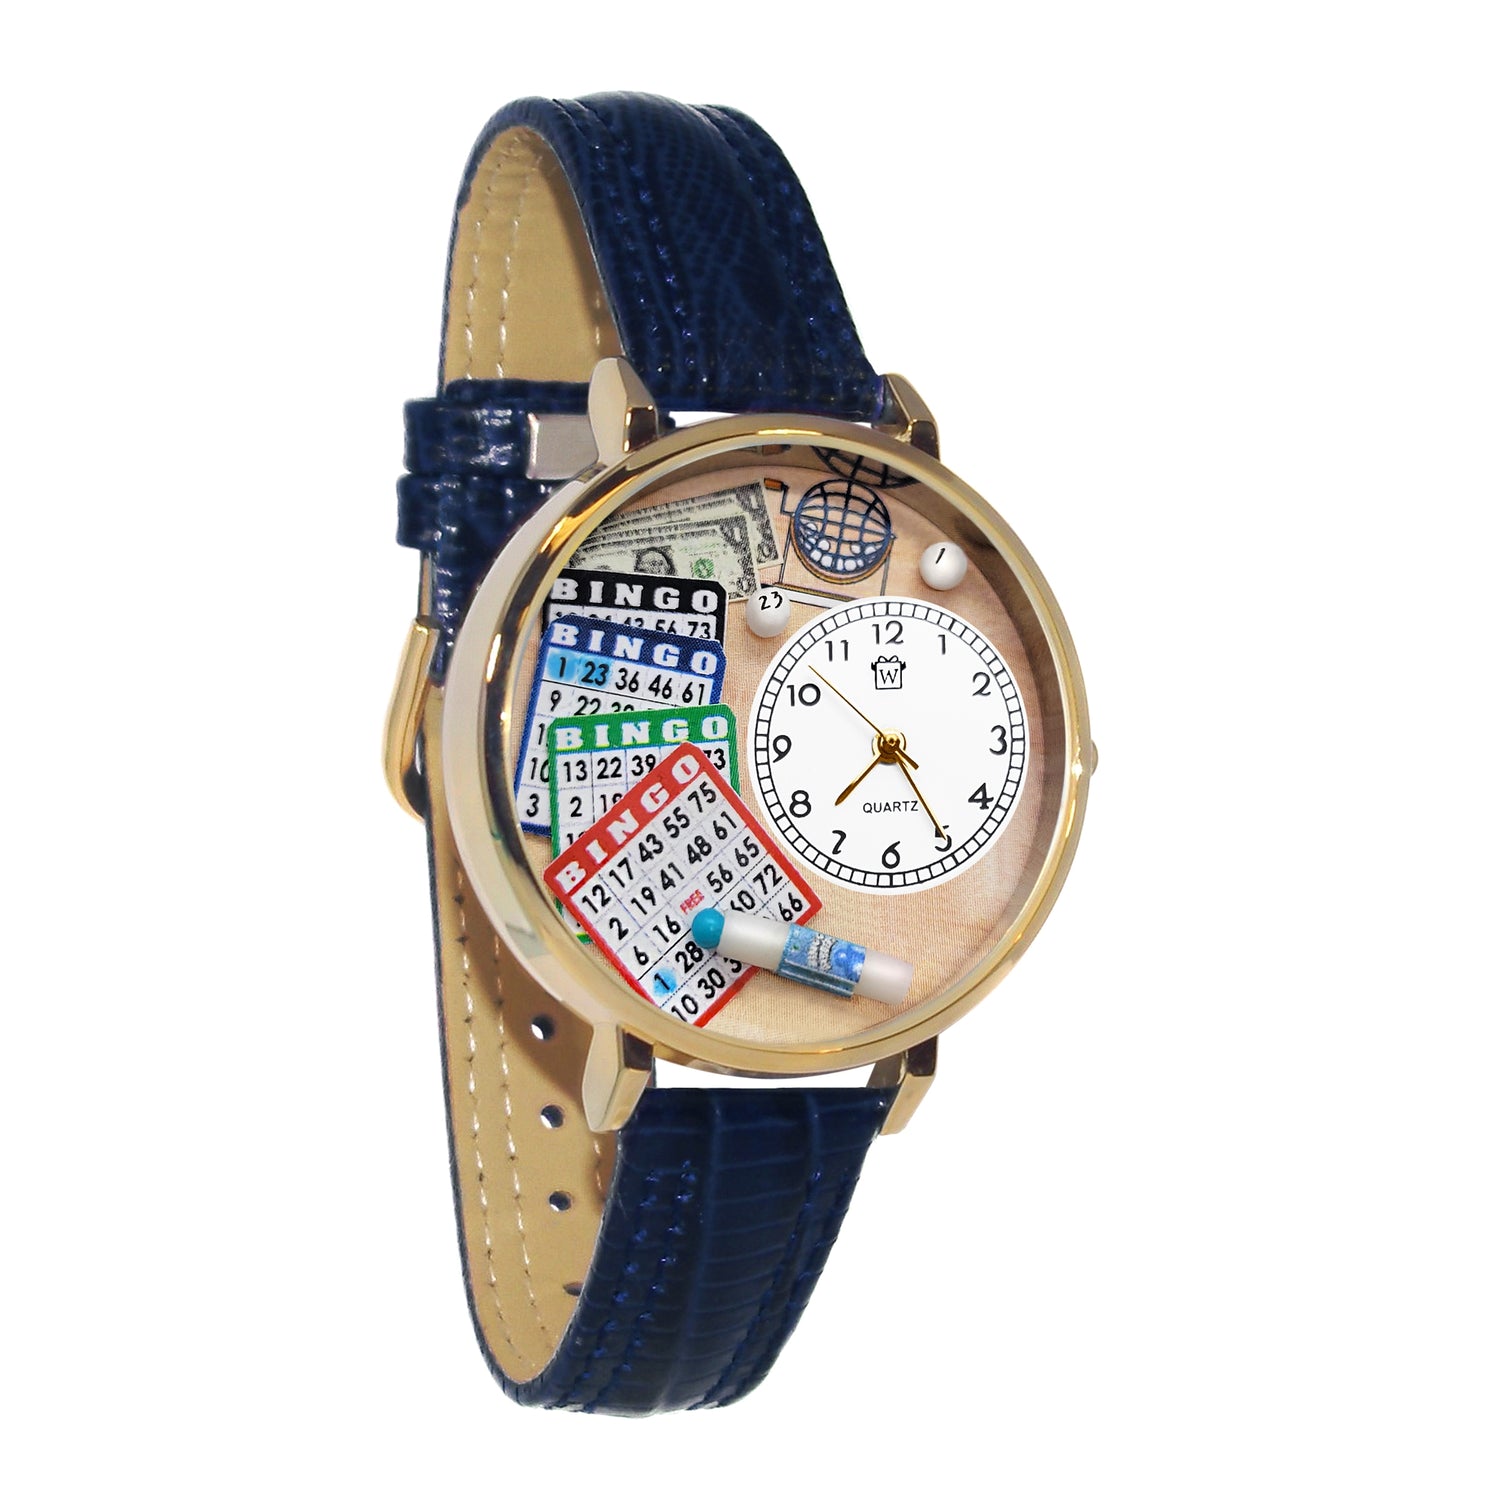 Whimsical Gifts | Bingo 3D Watch Large Style | Handmade in USA | Hobbies & Special Interests | Casino | Gaming | Game Night | Novelty Unique Fun Miniatures Gift | Gold Finish Navy Blue Leather Watch Band